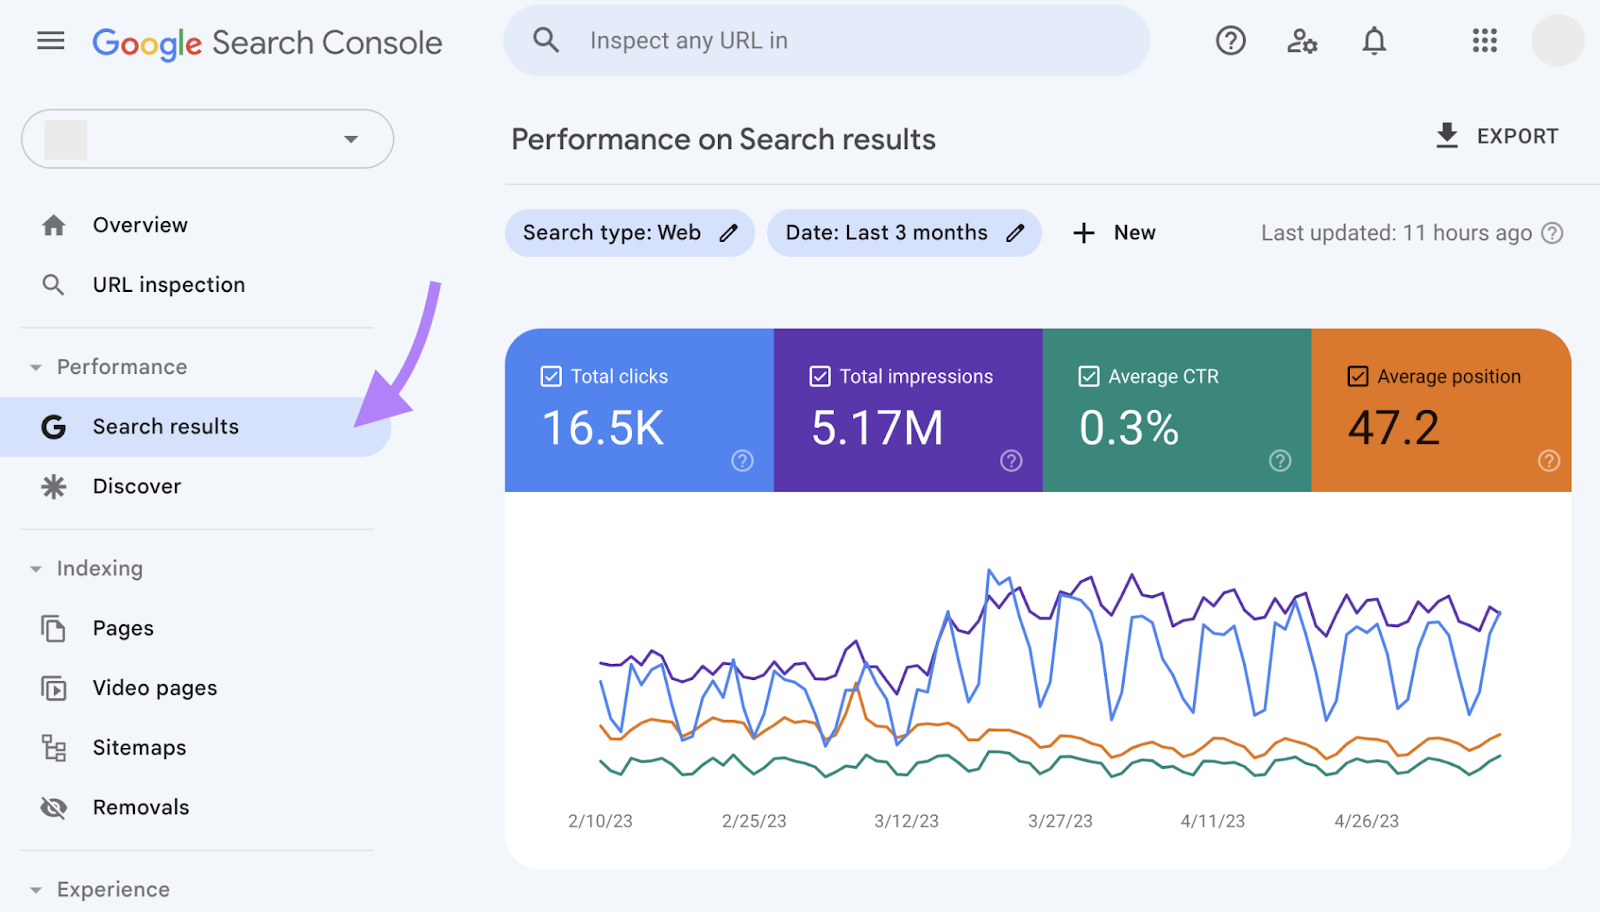 "Search results" option in Google Search Console